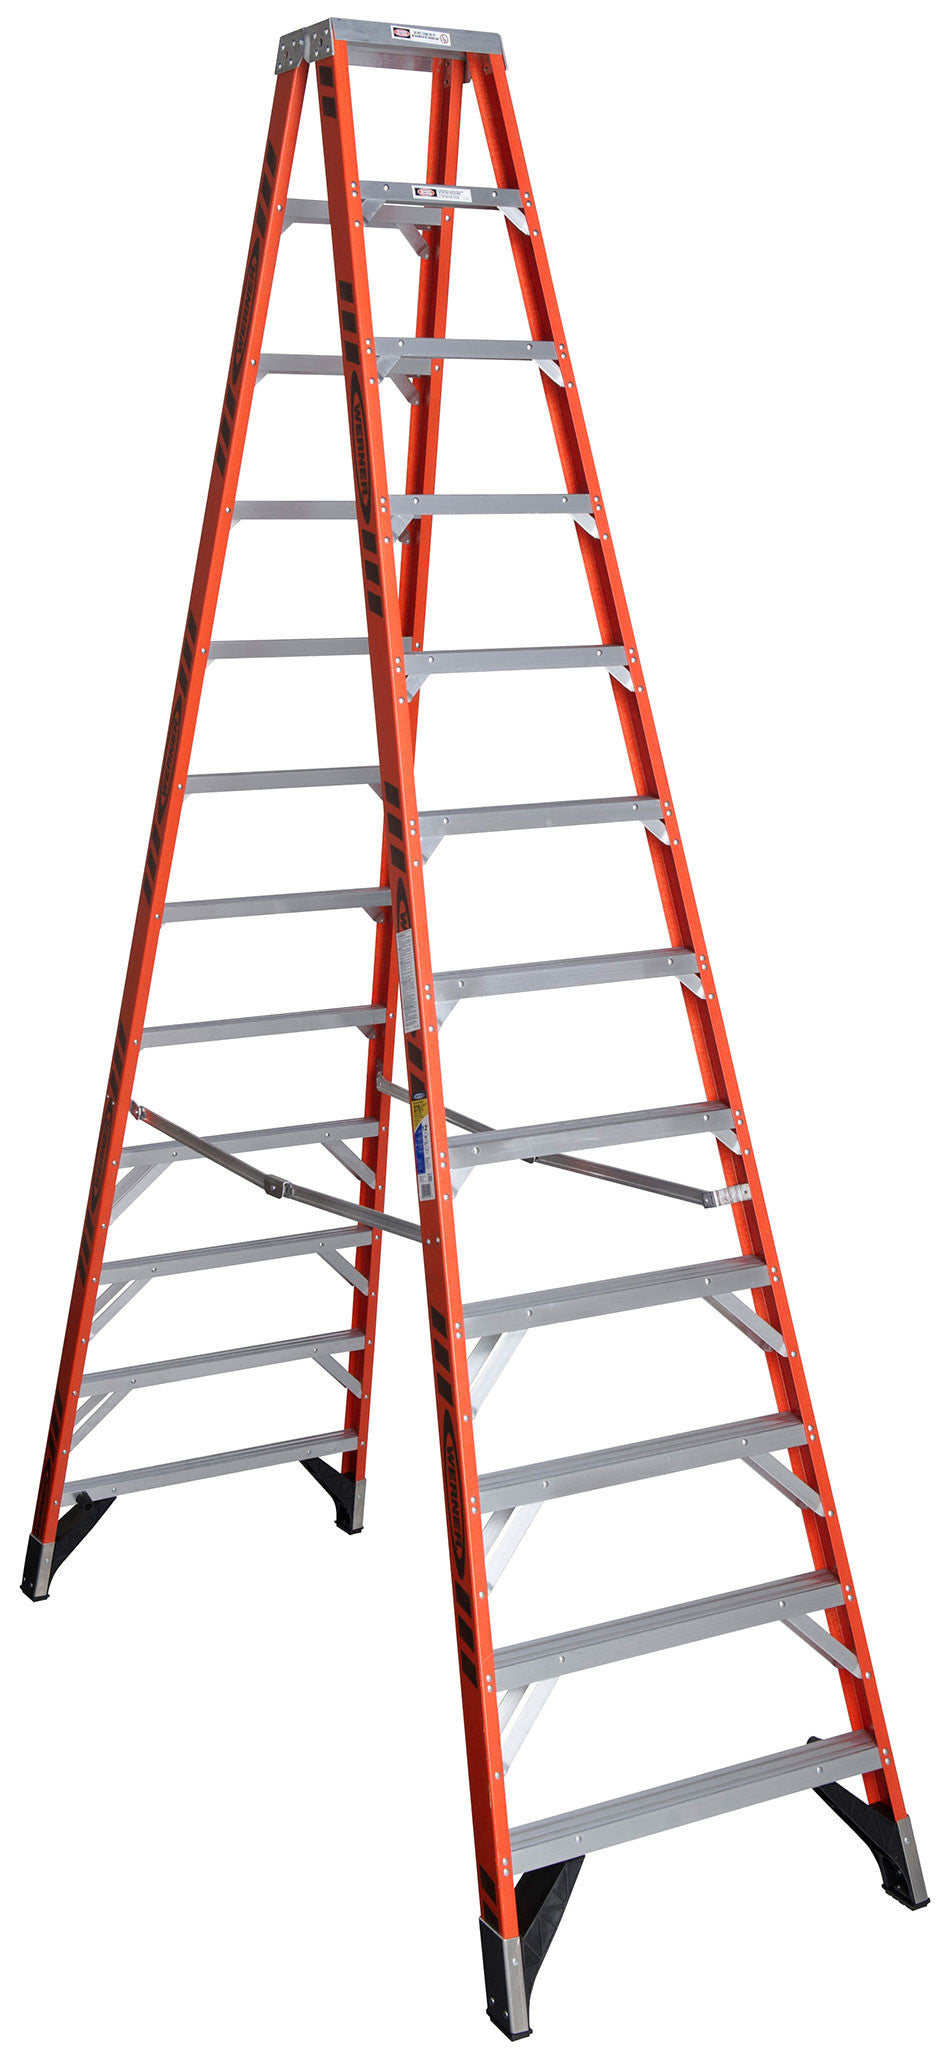 12' STEP LADDER DOUBLE SIDE